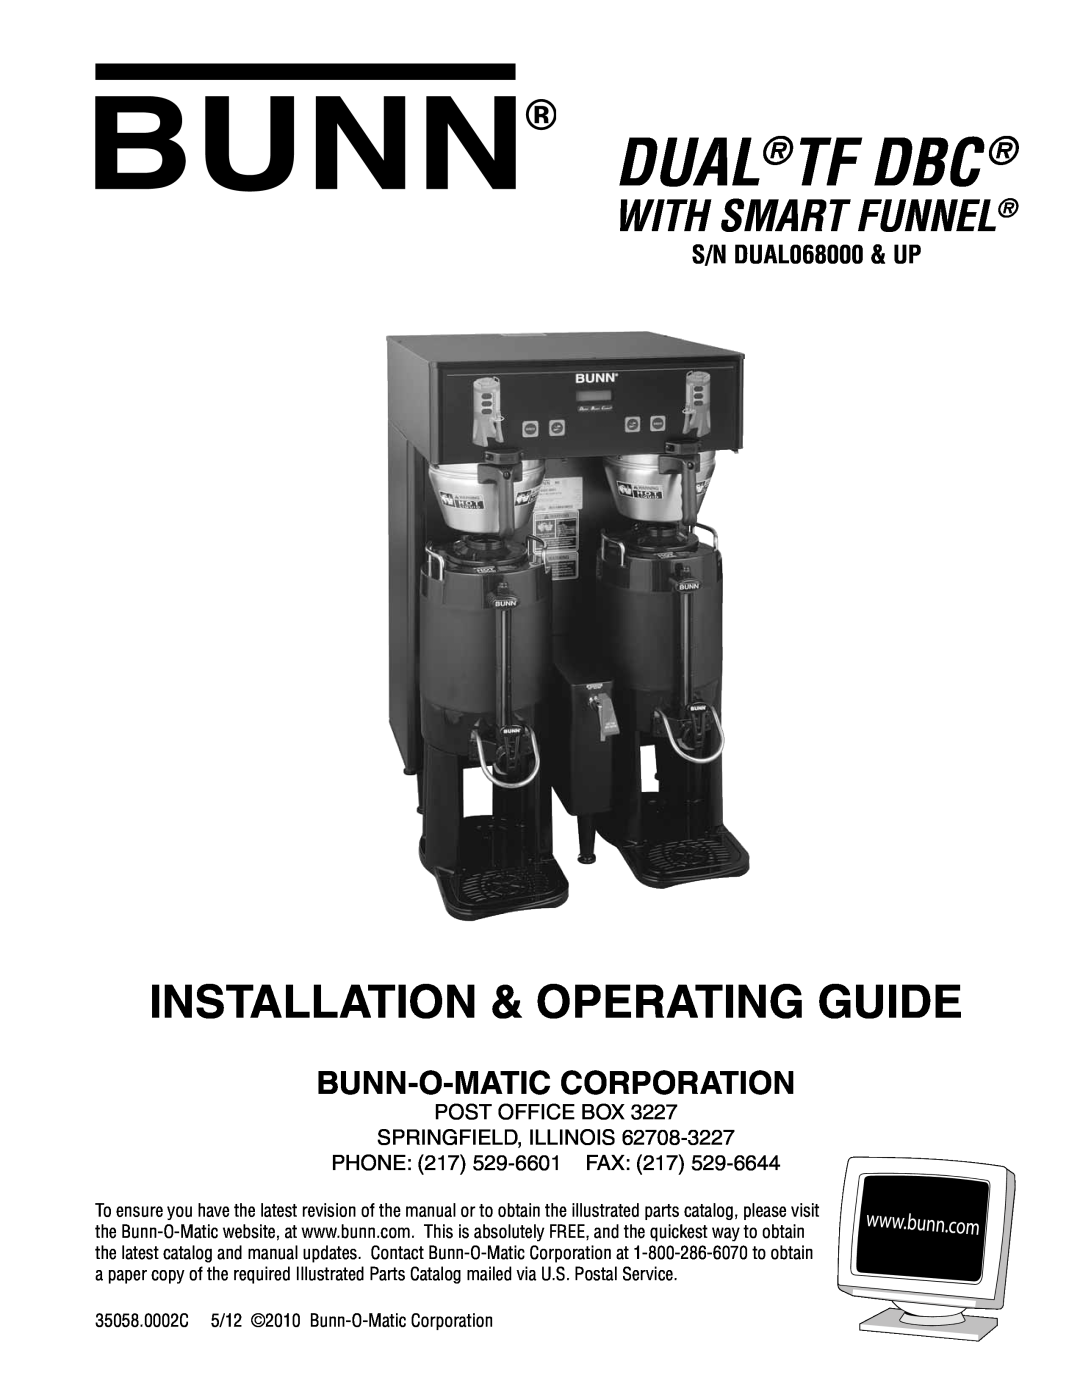 Bunn manual S/N DUAL068000 & UP, Dualtf Dbc, Installation & Operating Guide, With Smart Funnel, Bunn-O-Maticcorporation 